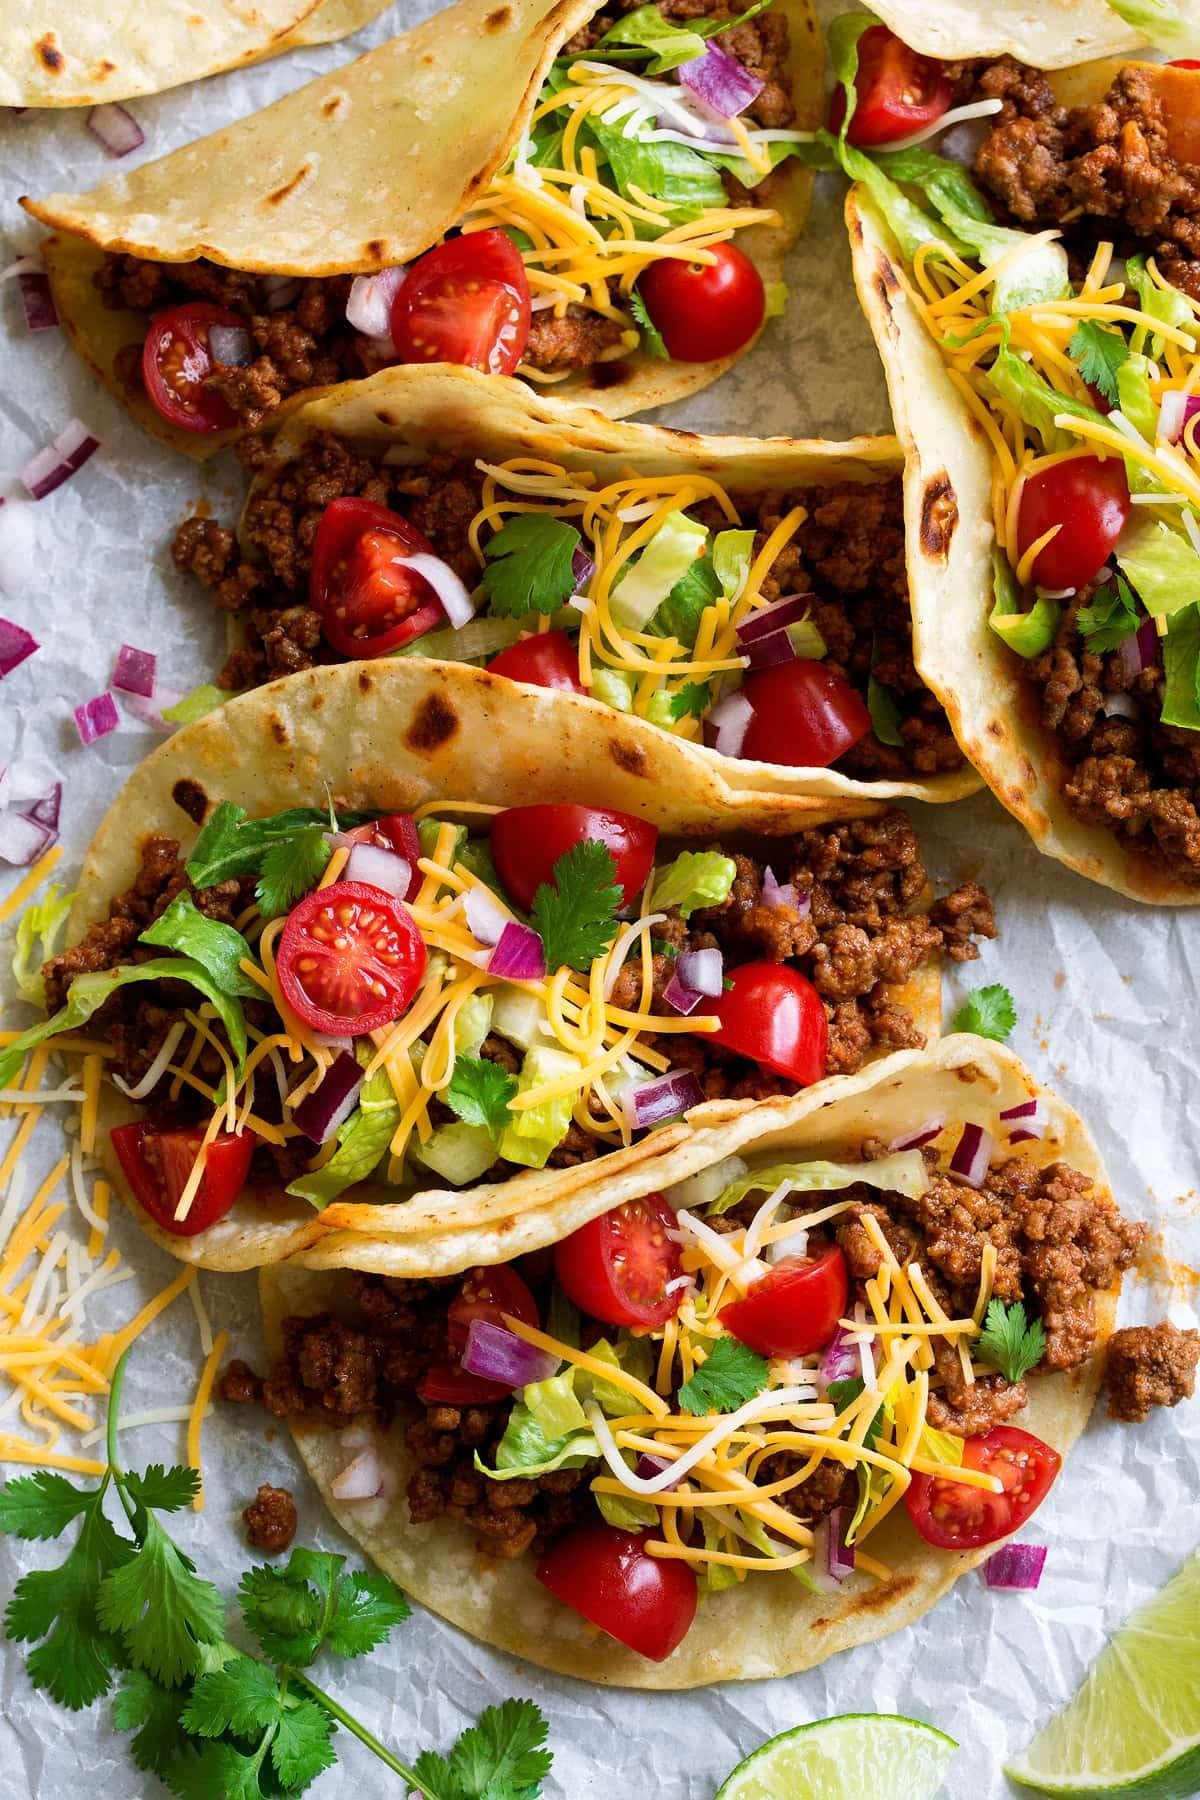 Tantalizing Taco Tuesday: Easy Steps to Crafting Perfectly Spiced Ground Beef Tacos